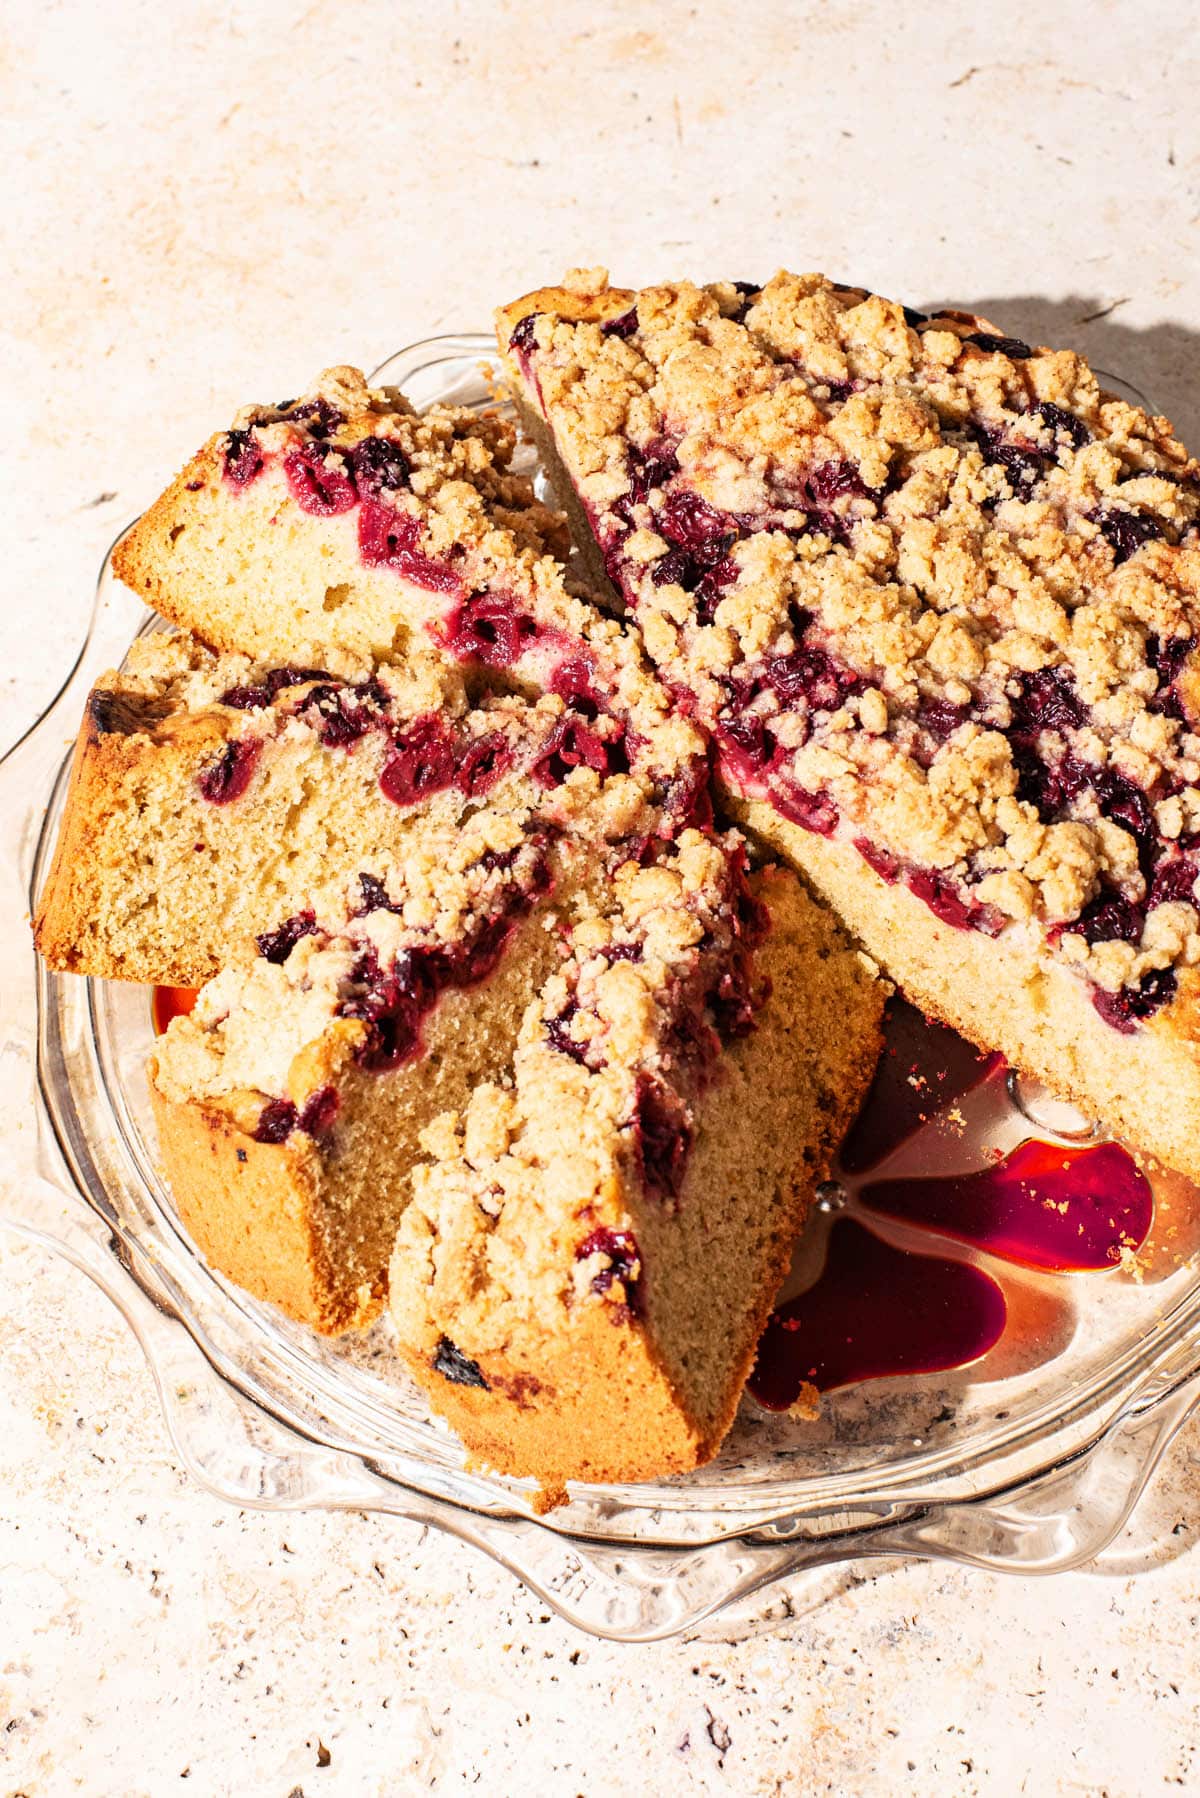 A large single-layer cake with cherries and a crumble topping on a glass cake stand.